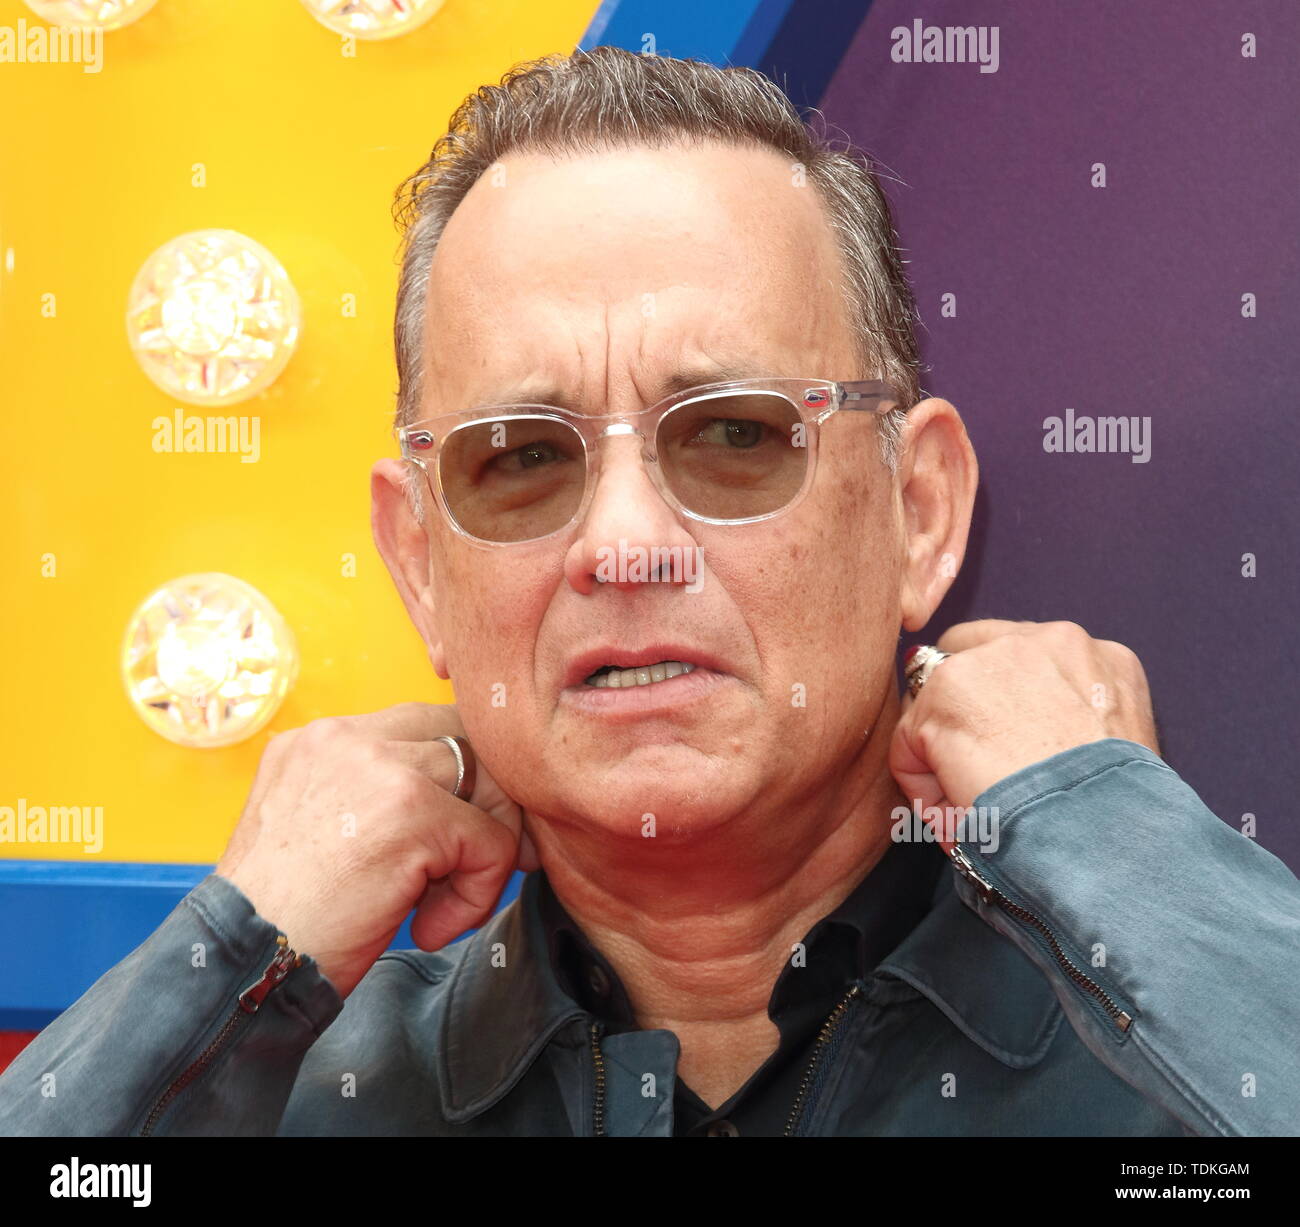 London, UK. 16th June, 2019. Tom Hanks attends the European Premiere of Toy Story 4 at Odeon Luxe, Leicester Square in London. Credit: SOPA Images Limited/Alamy Live News Stock Photo